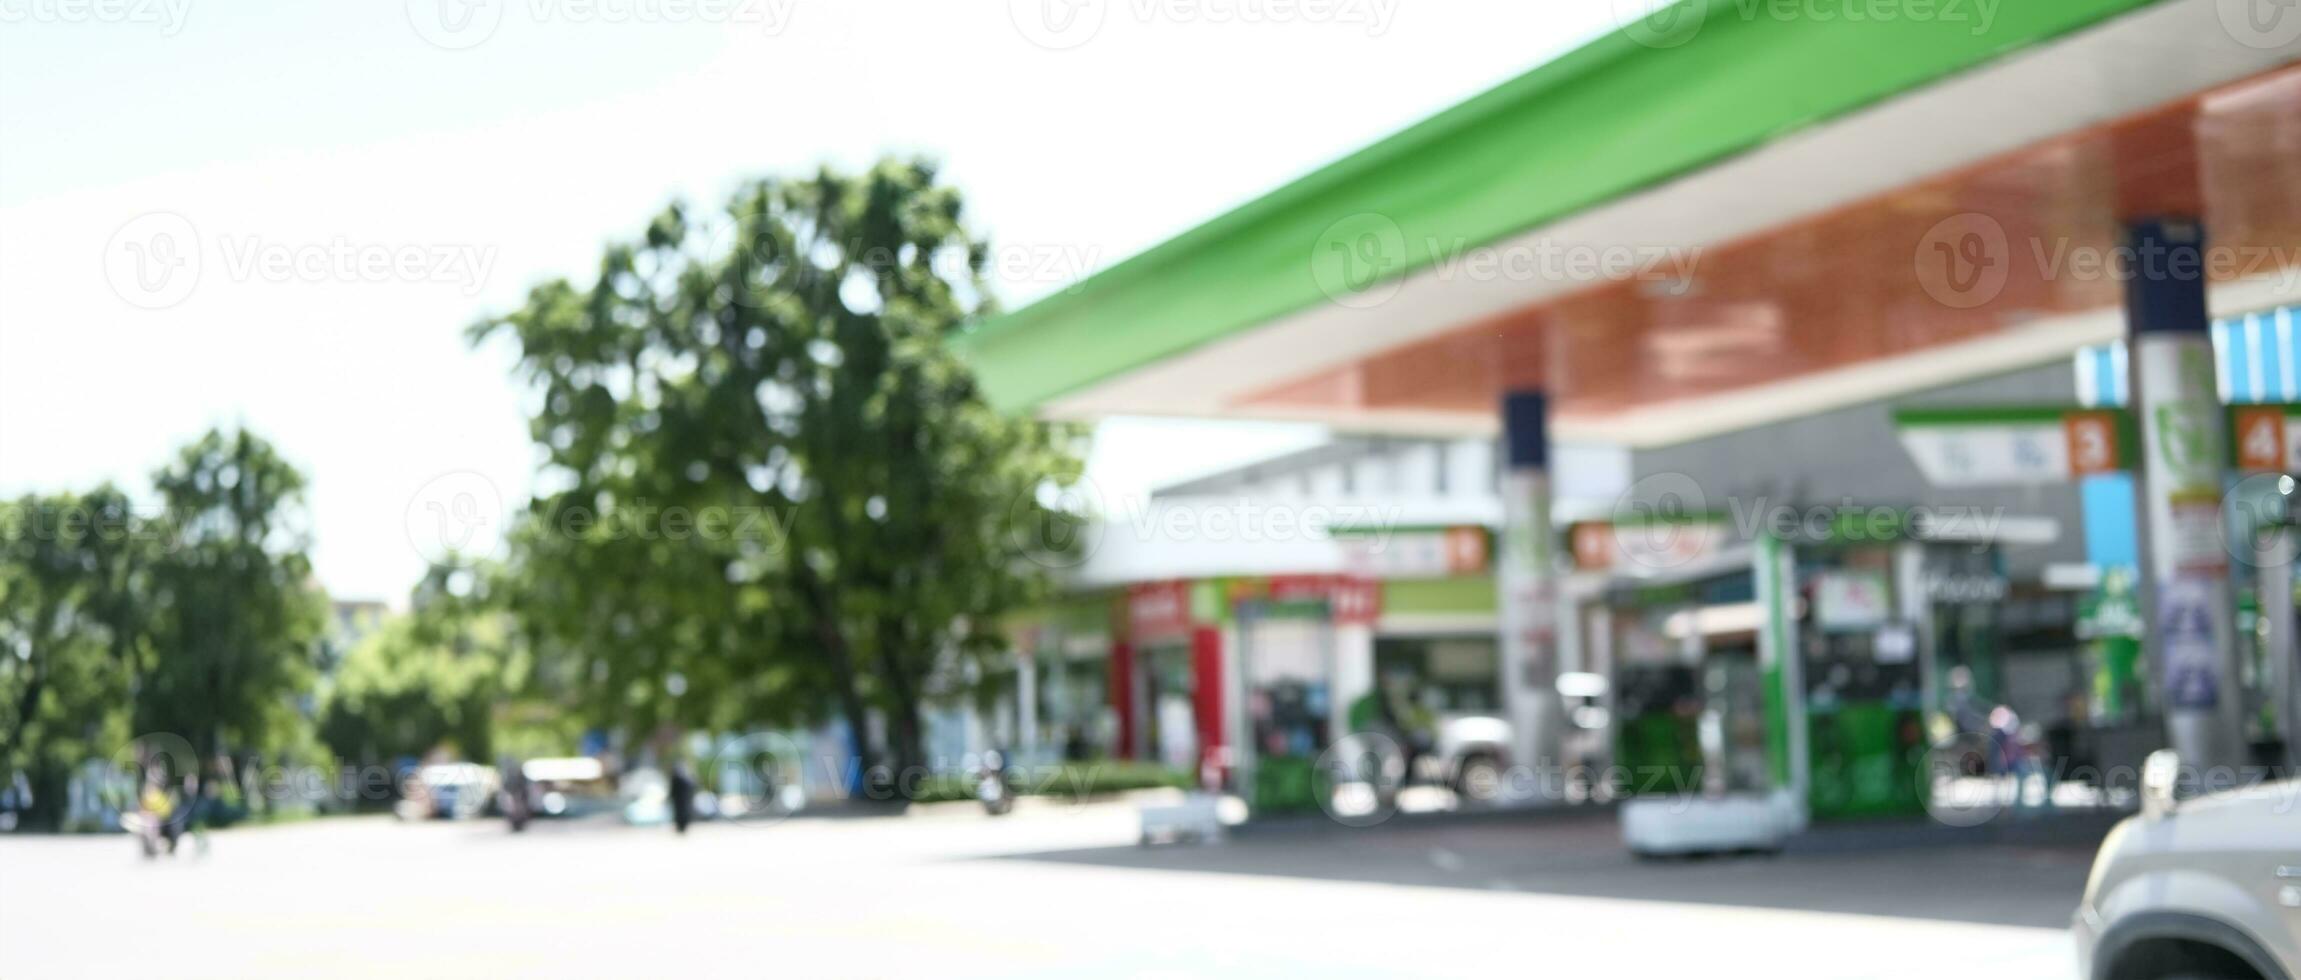 gas station blurred background for automobile industry photo